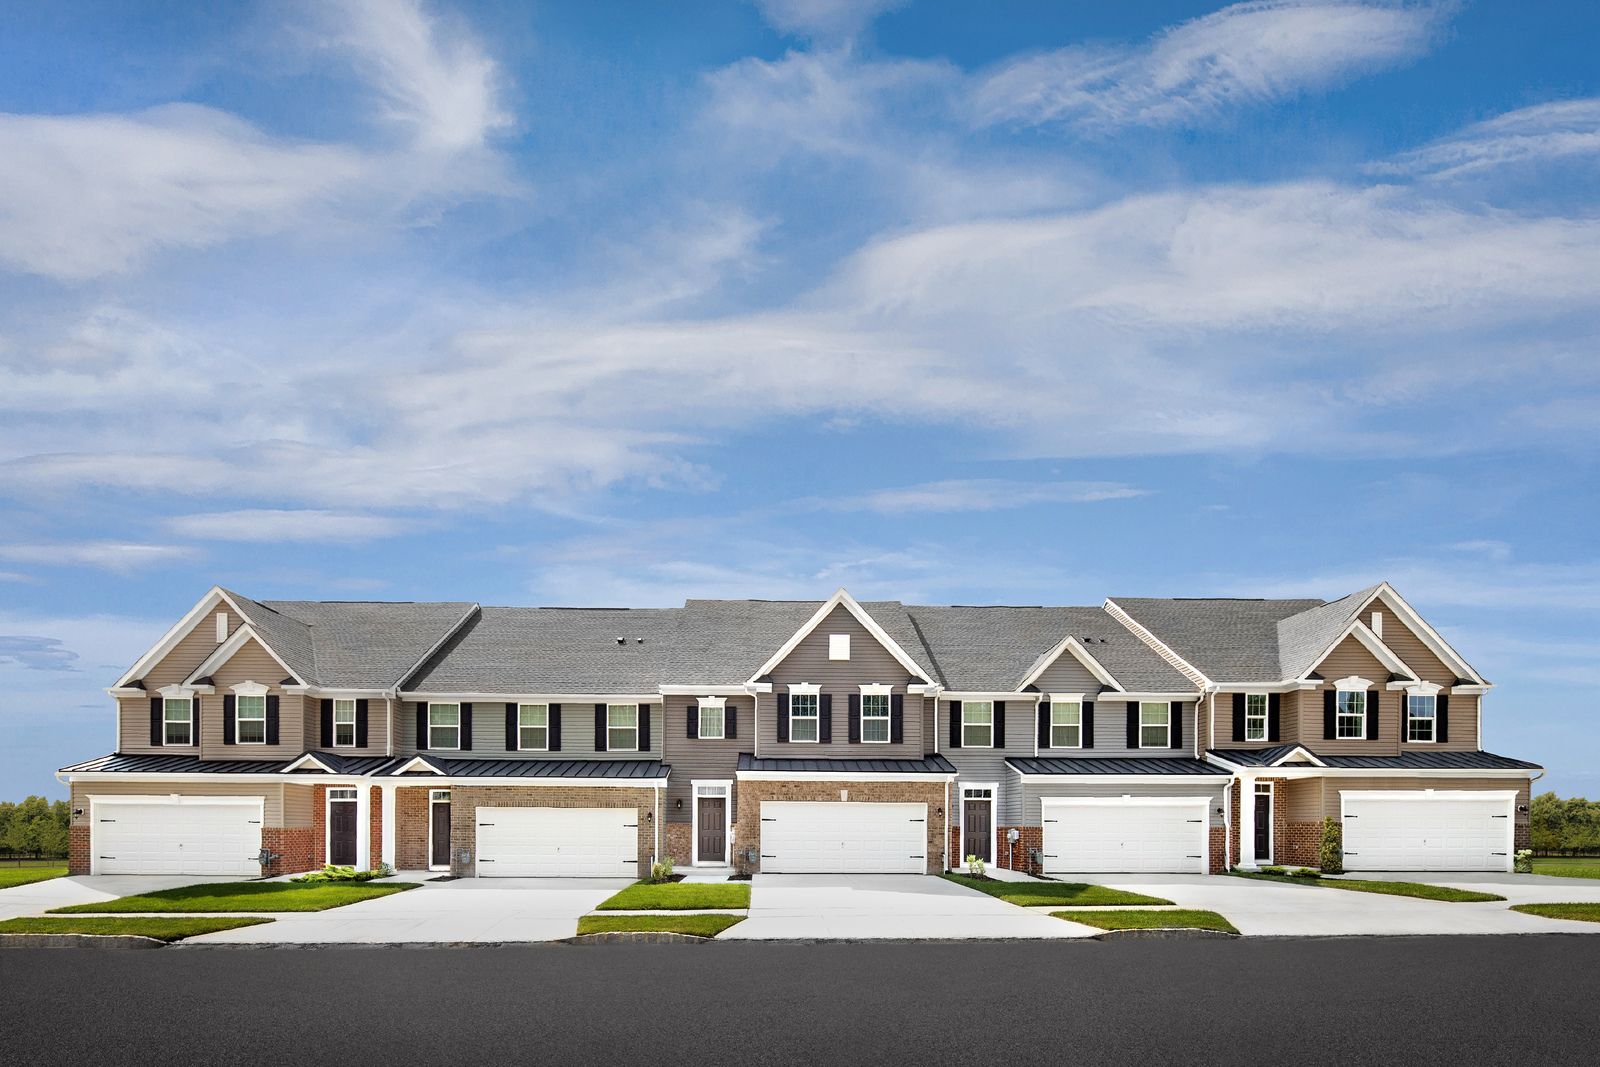 Welcome to Foxtail Creek Townhomes, a 55+ Community